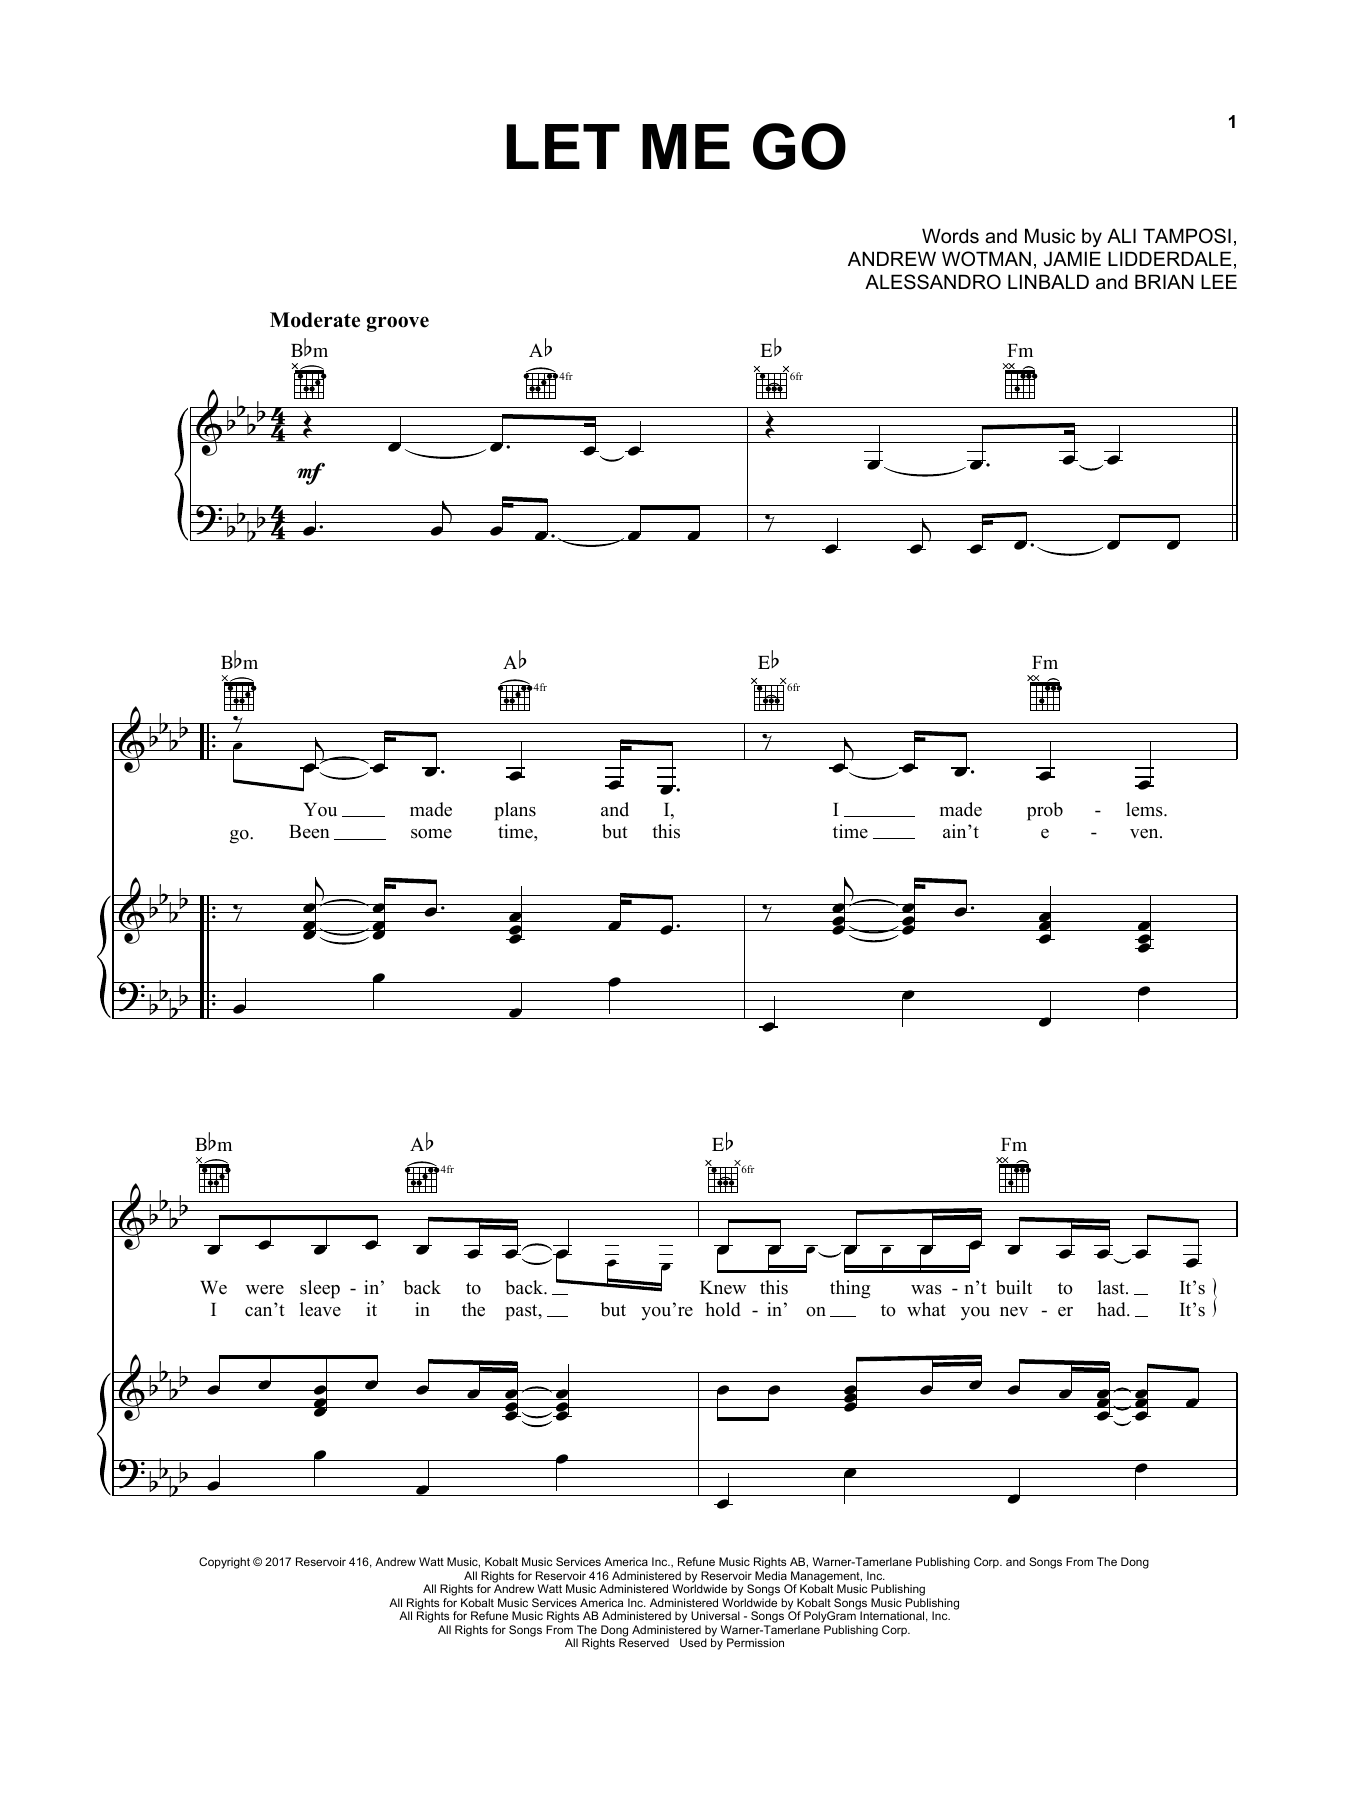 Download Hailee Steinfeld and Alesso feat. Fl Let Me Go Sheet Music